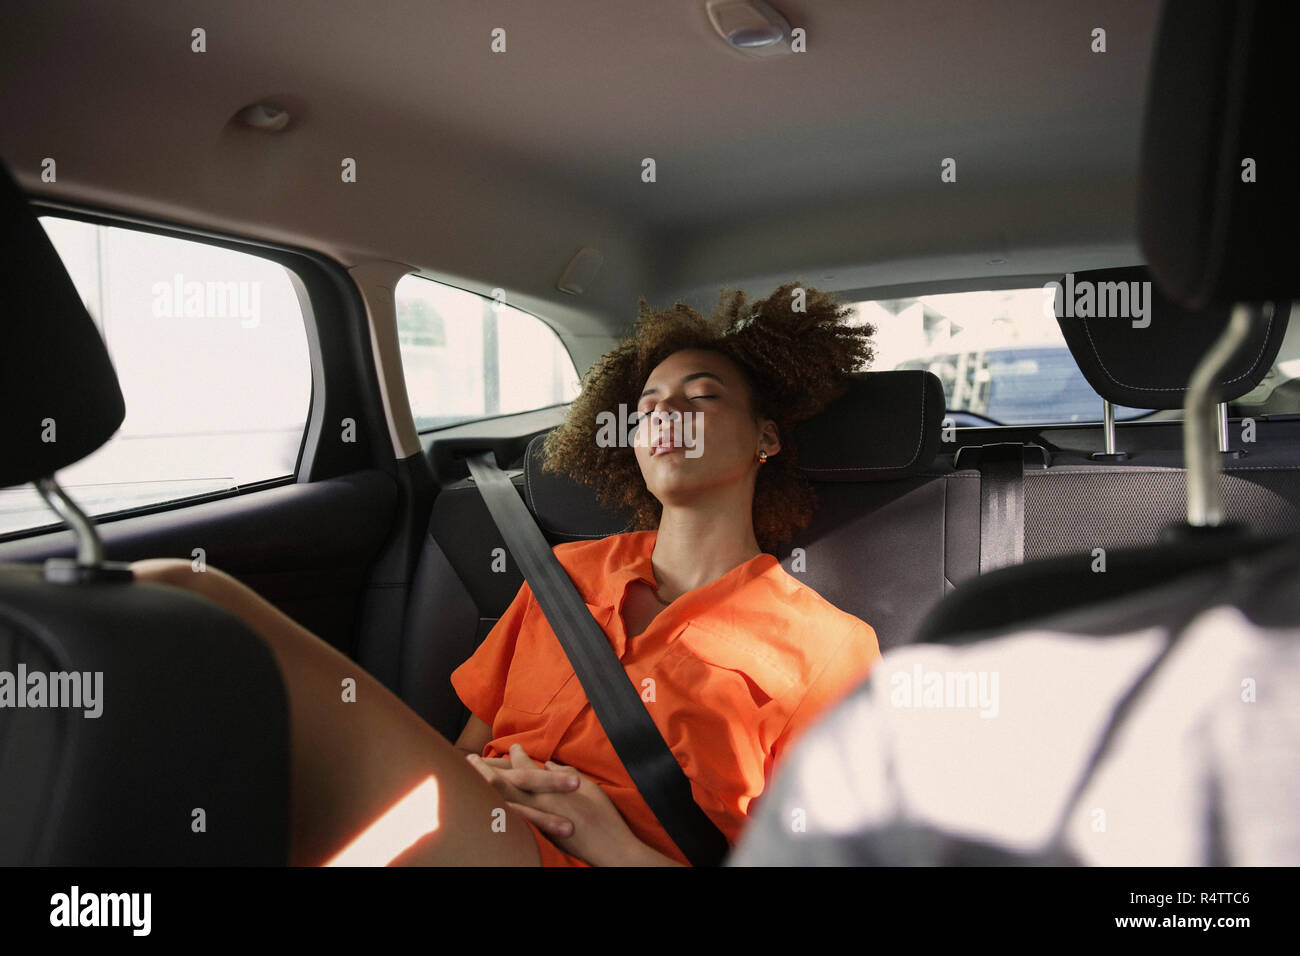 Tired young woman sleeping in back seat of car Stock Photo